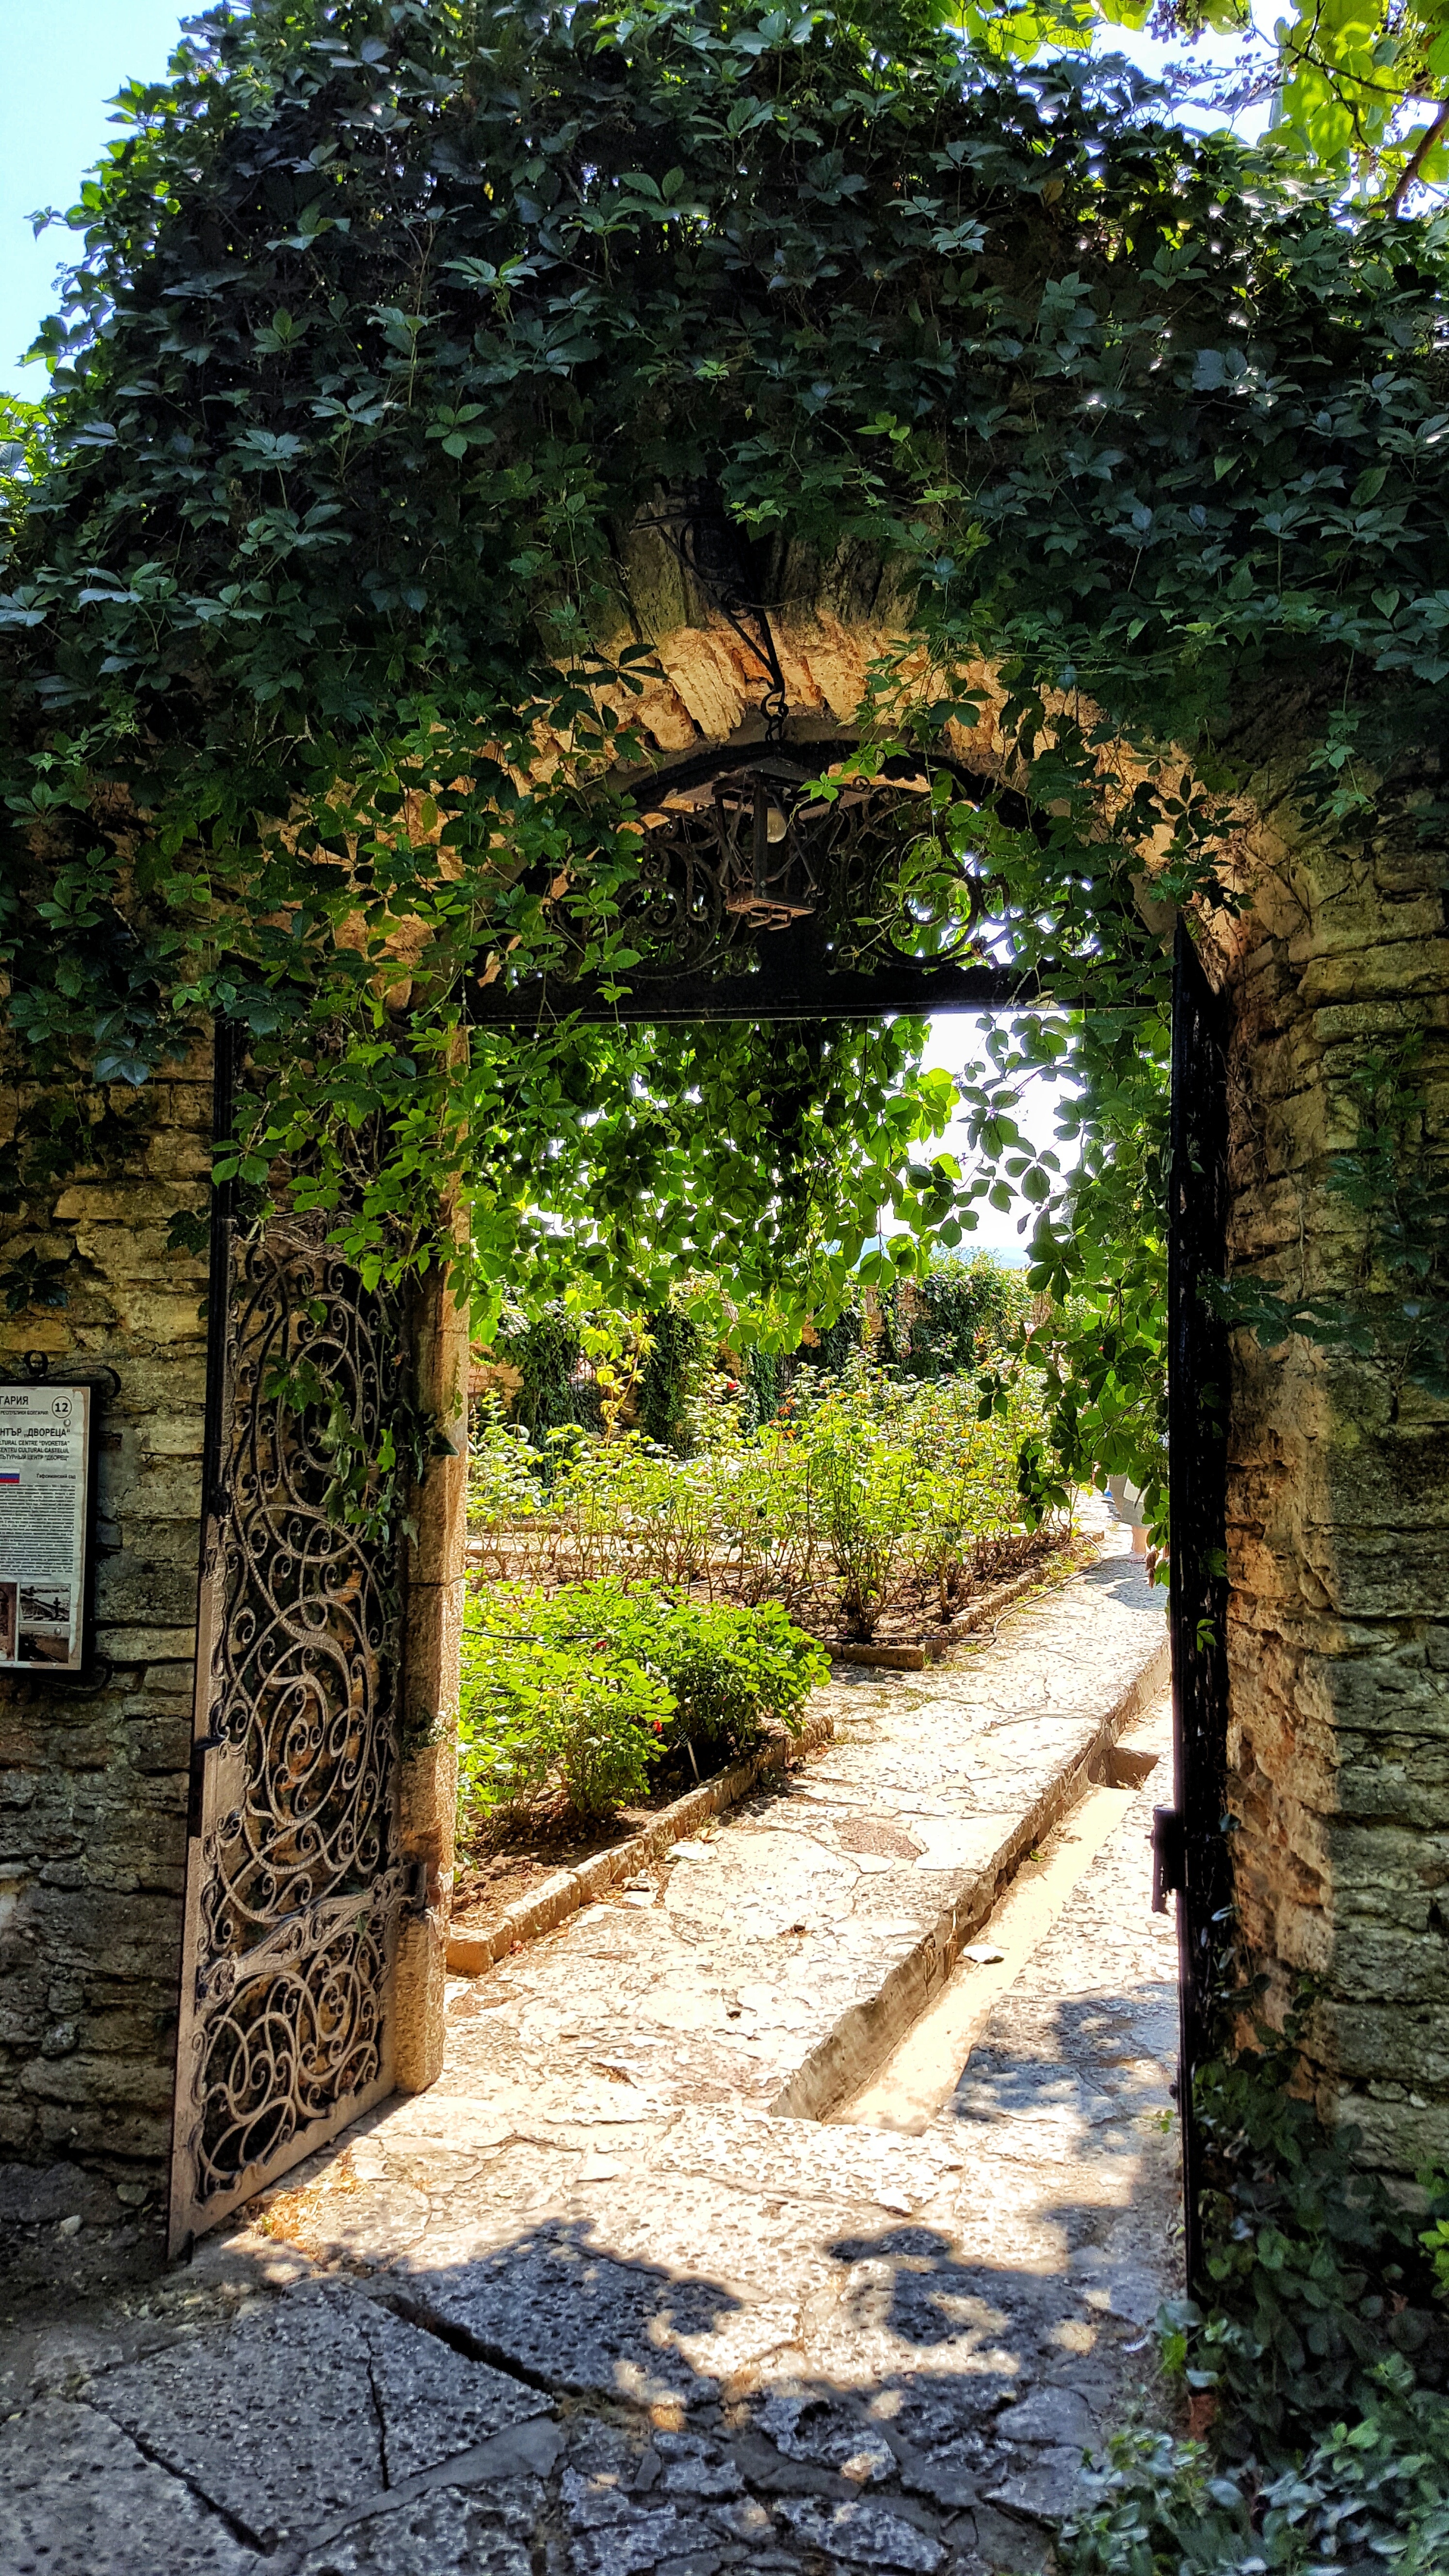 Gate, Arc, Garden, Stone, Entry, day, no people